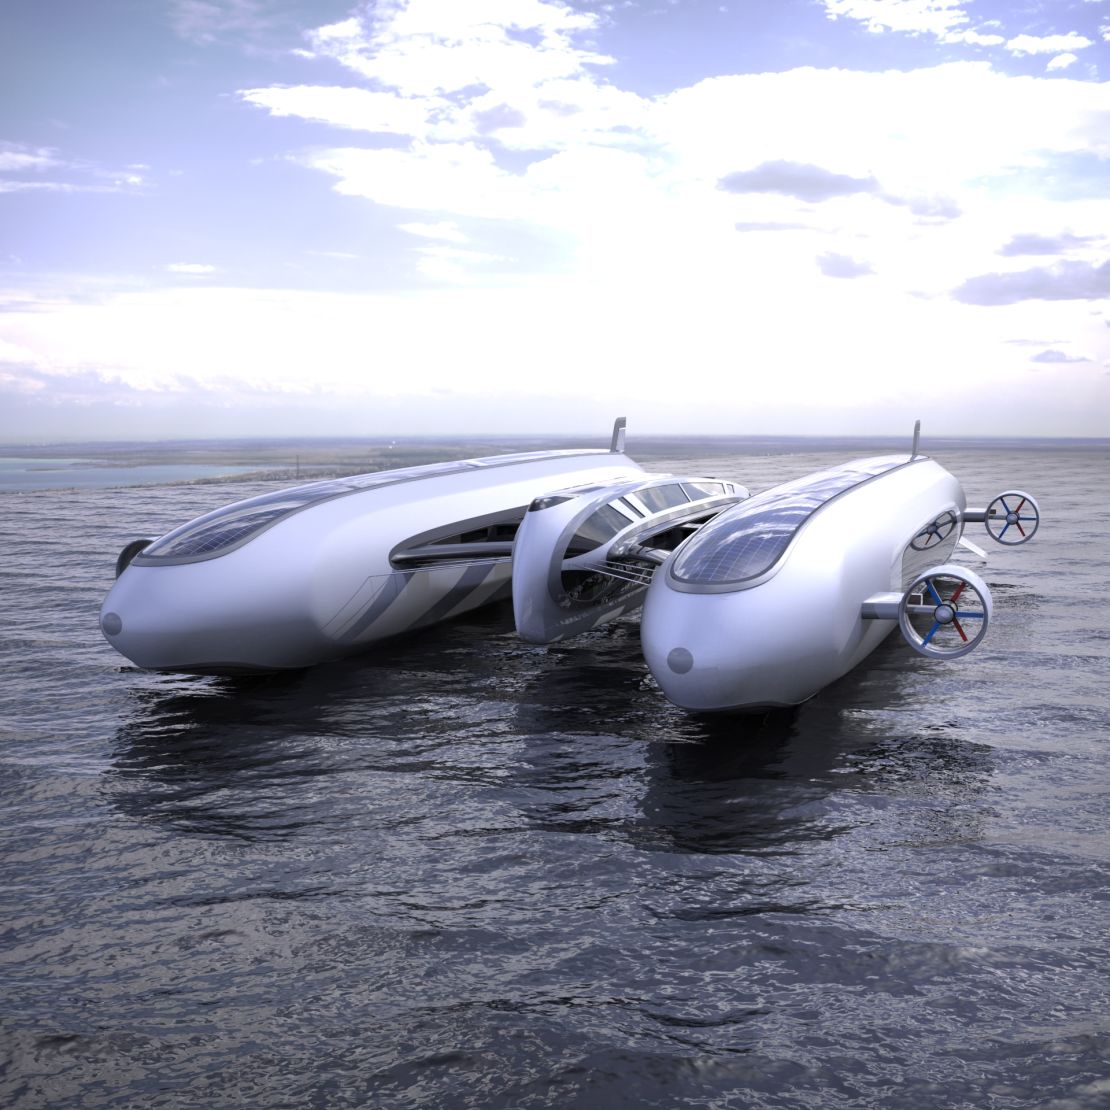 While Air Yacht is still in the early phases of the design process, a prototype will be launched this year.